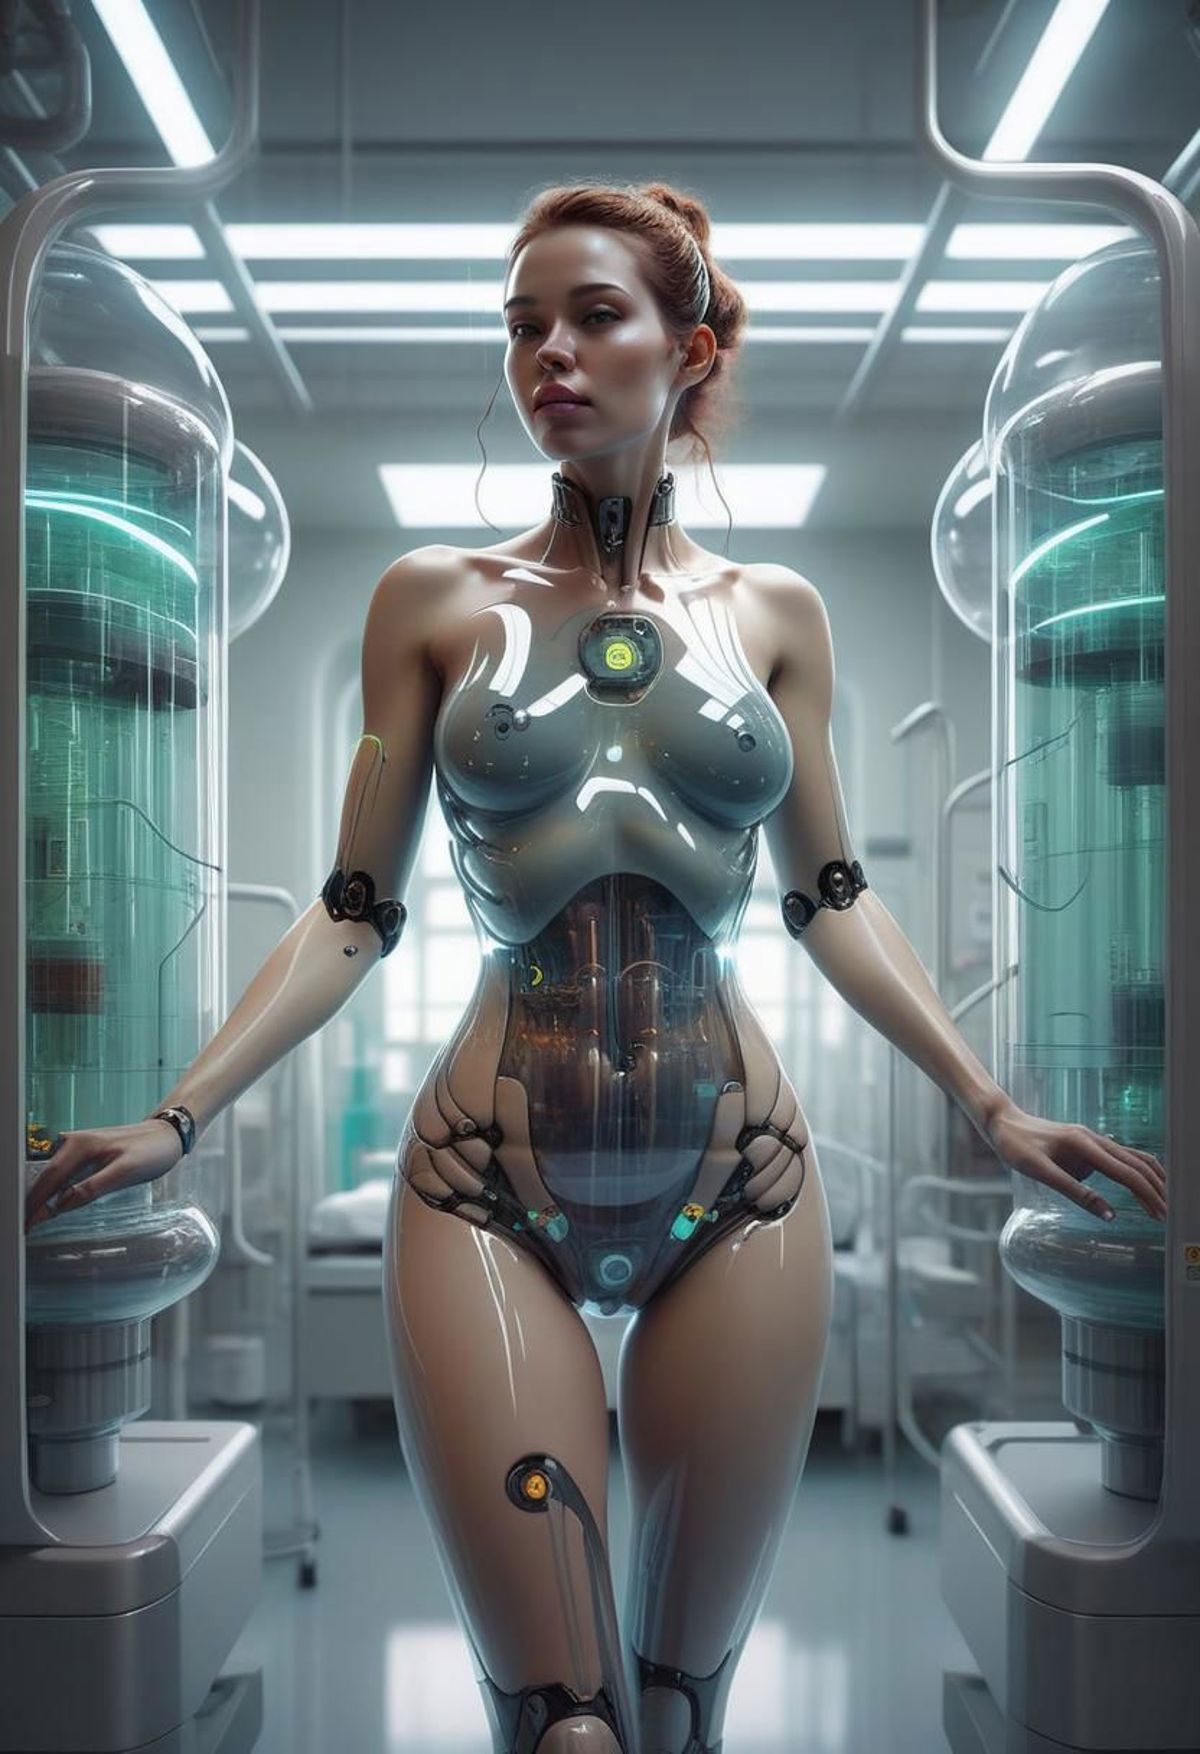 A robotic woman with a metal body and a plastic face standing in a room with refrigerators.